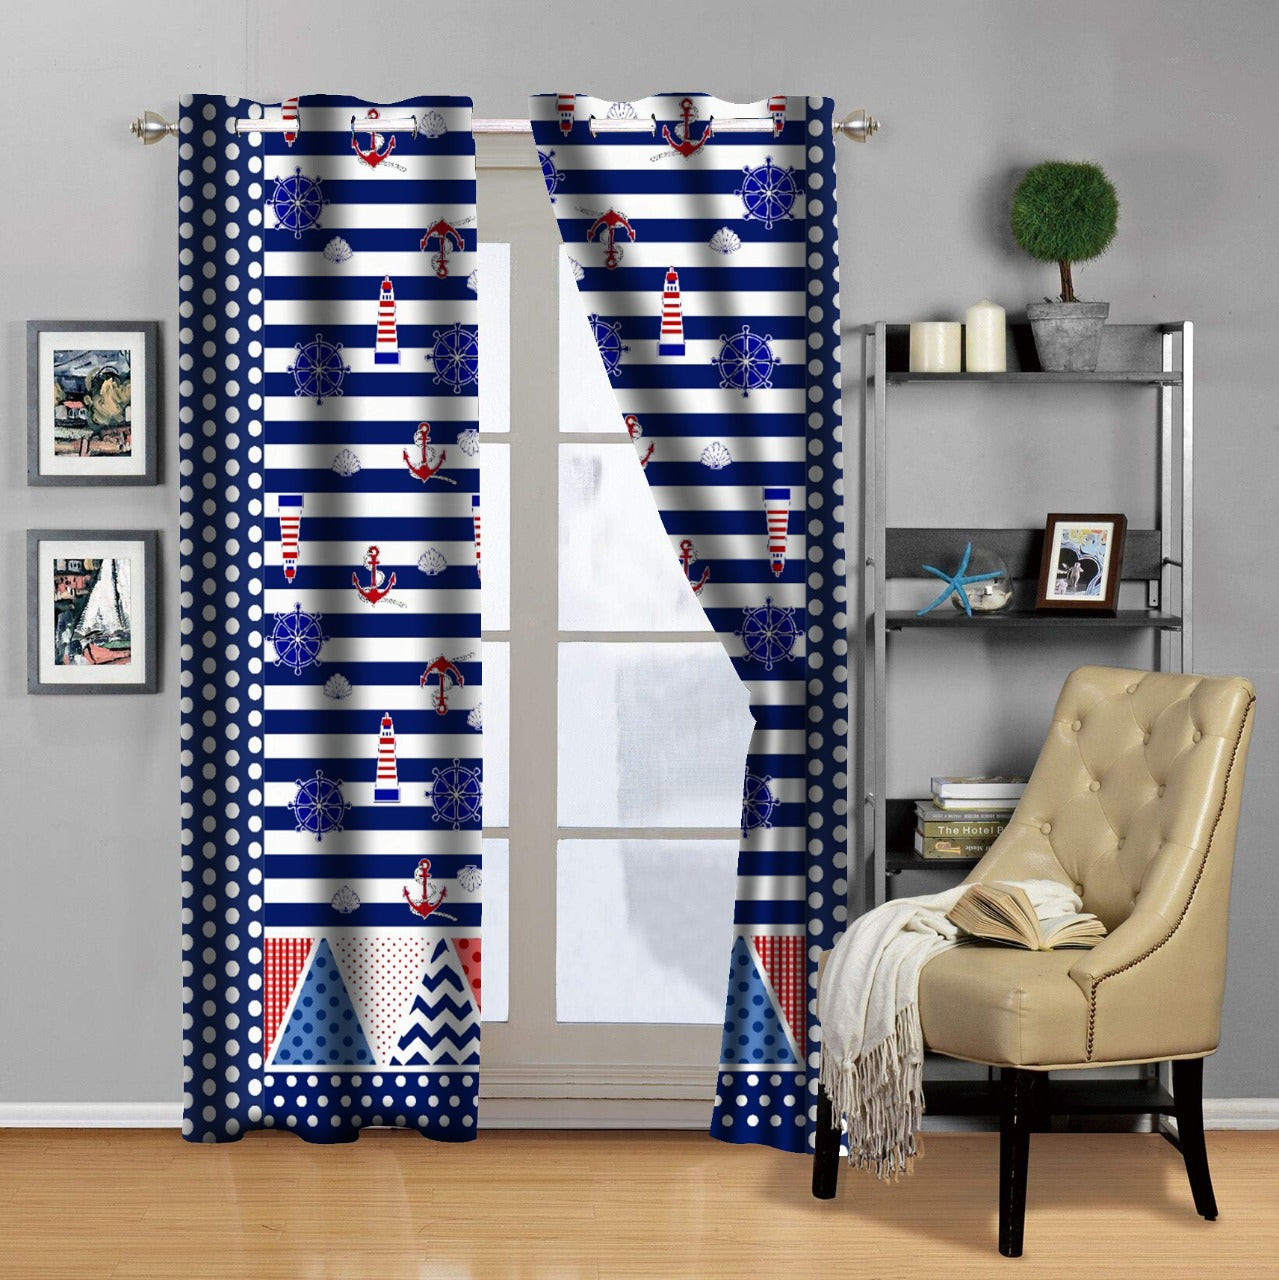 2 PCs Duck Curtains Panel With Lining-Sea Fort Apricot